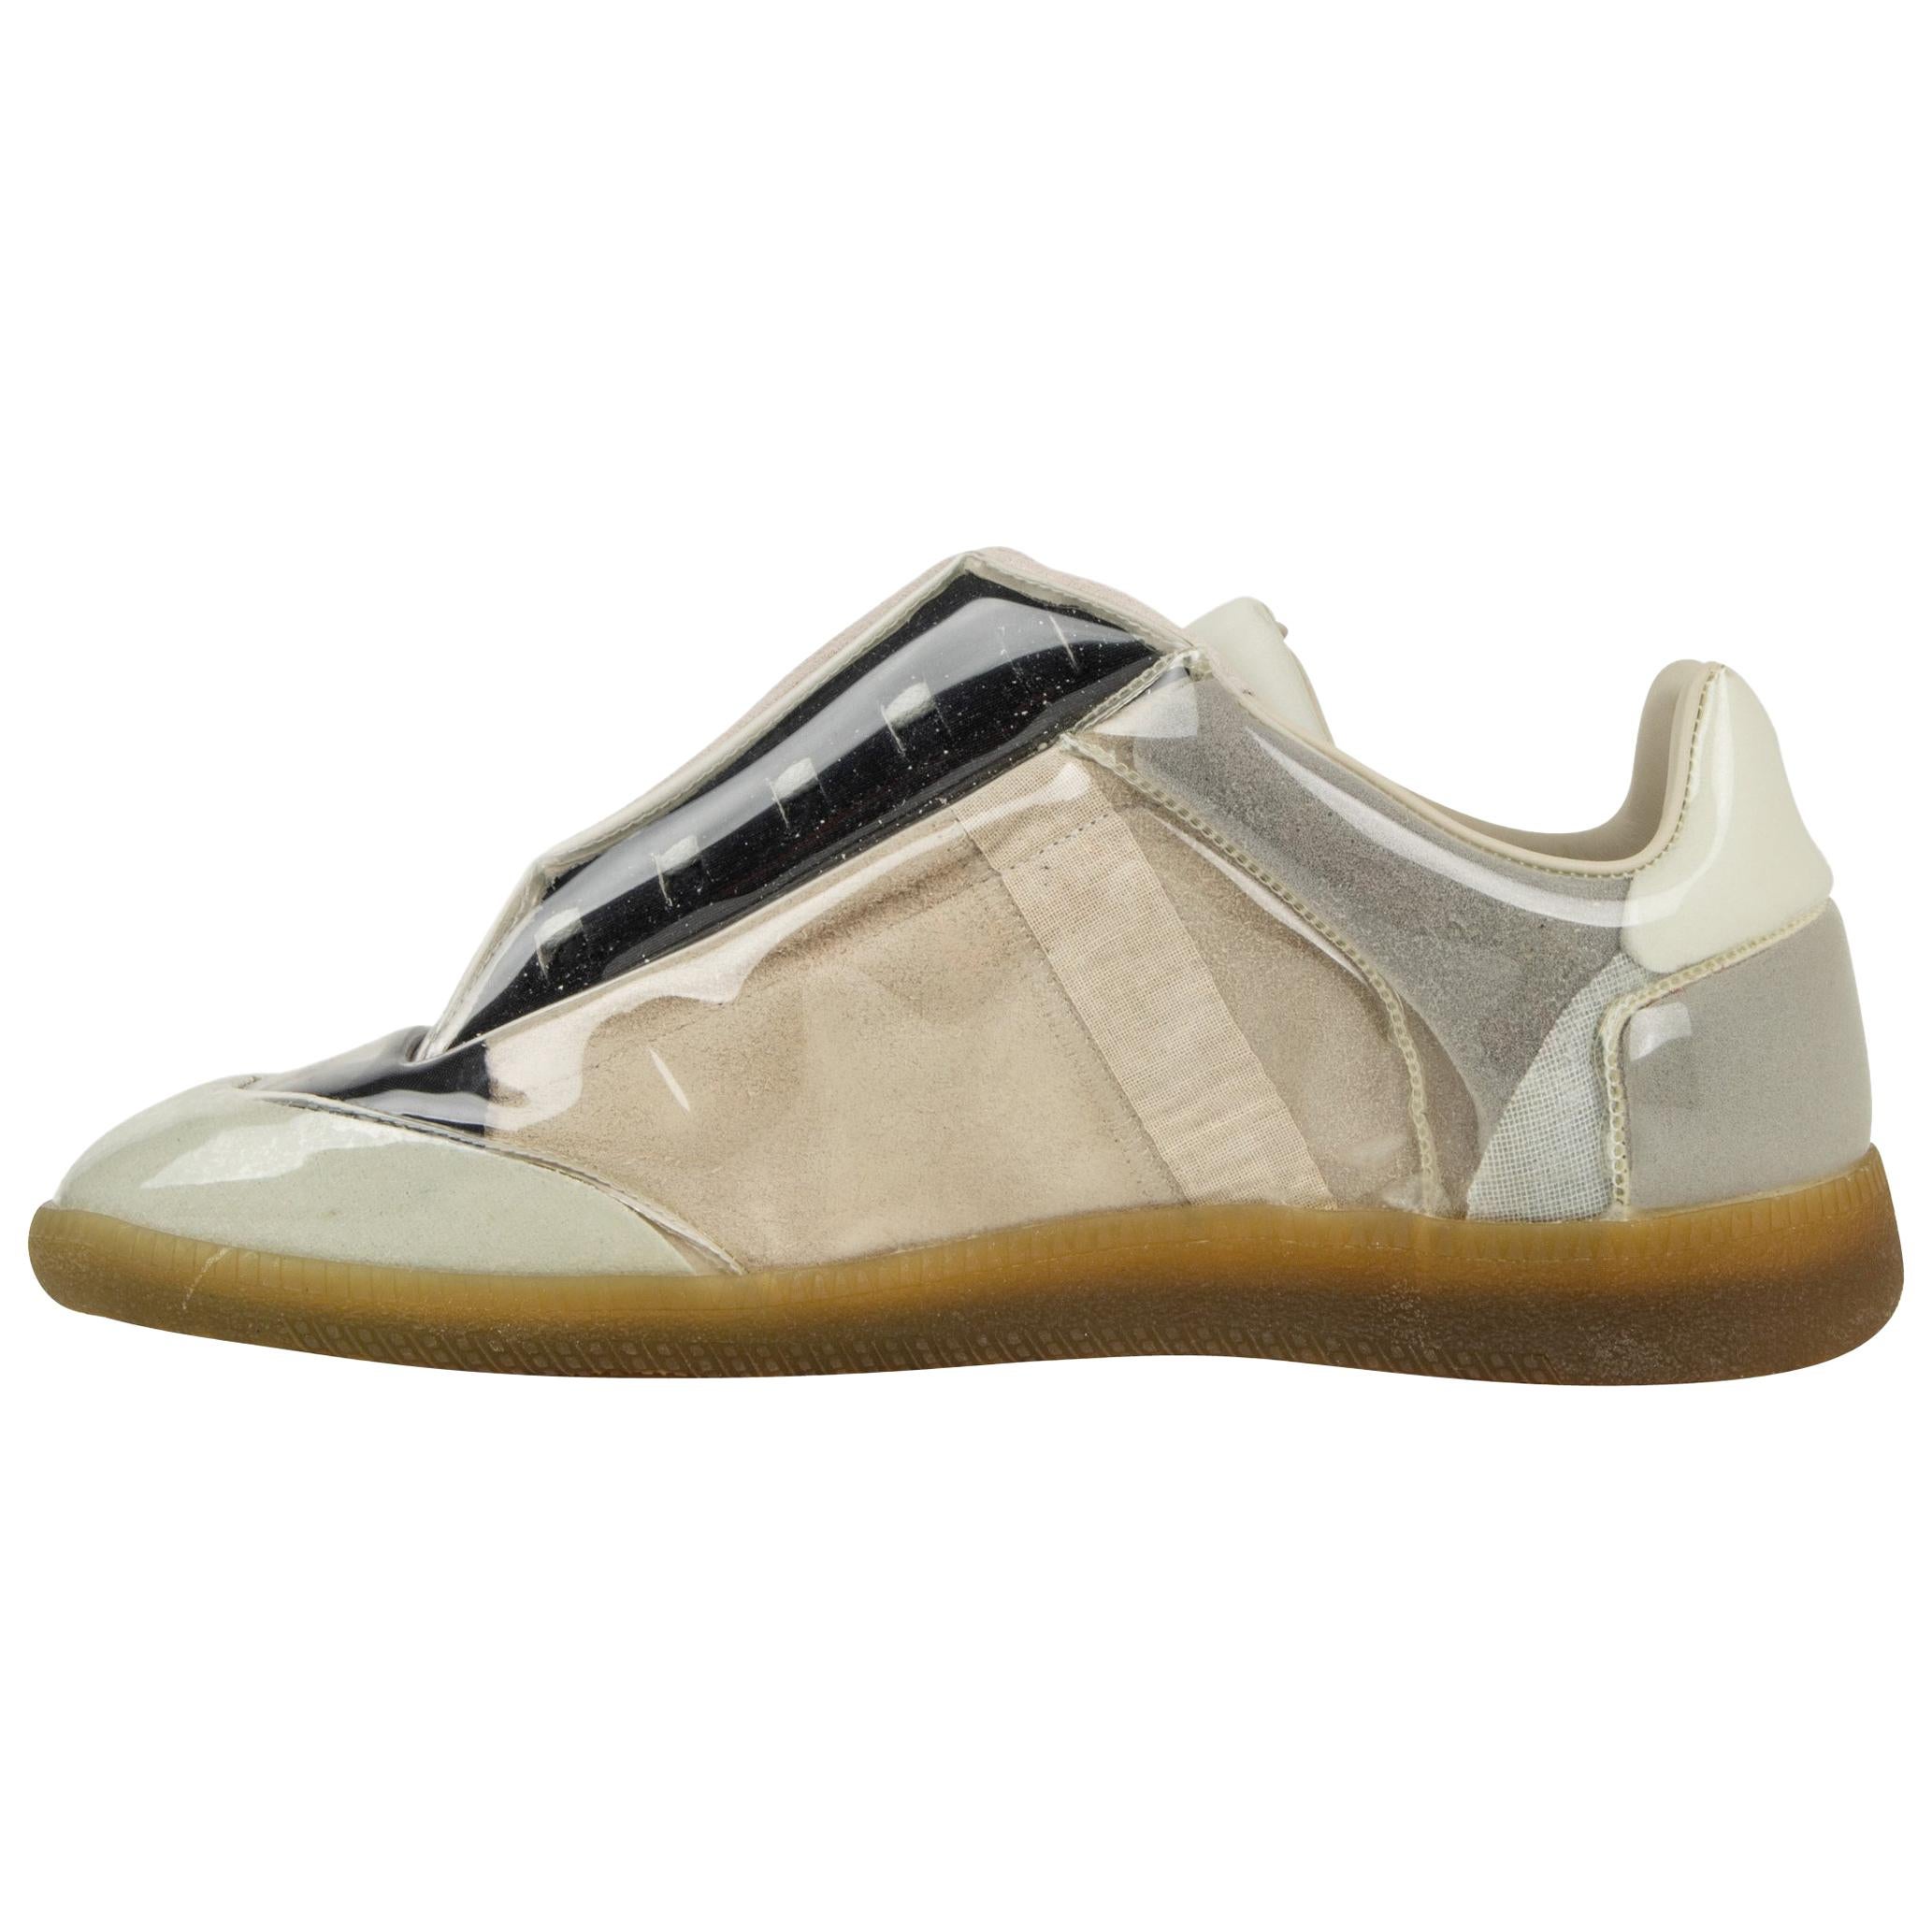 Maison Martin Margiela Men's Sneaker Suede and Leather with PVC Cover 43